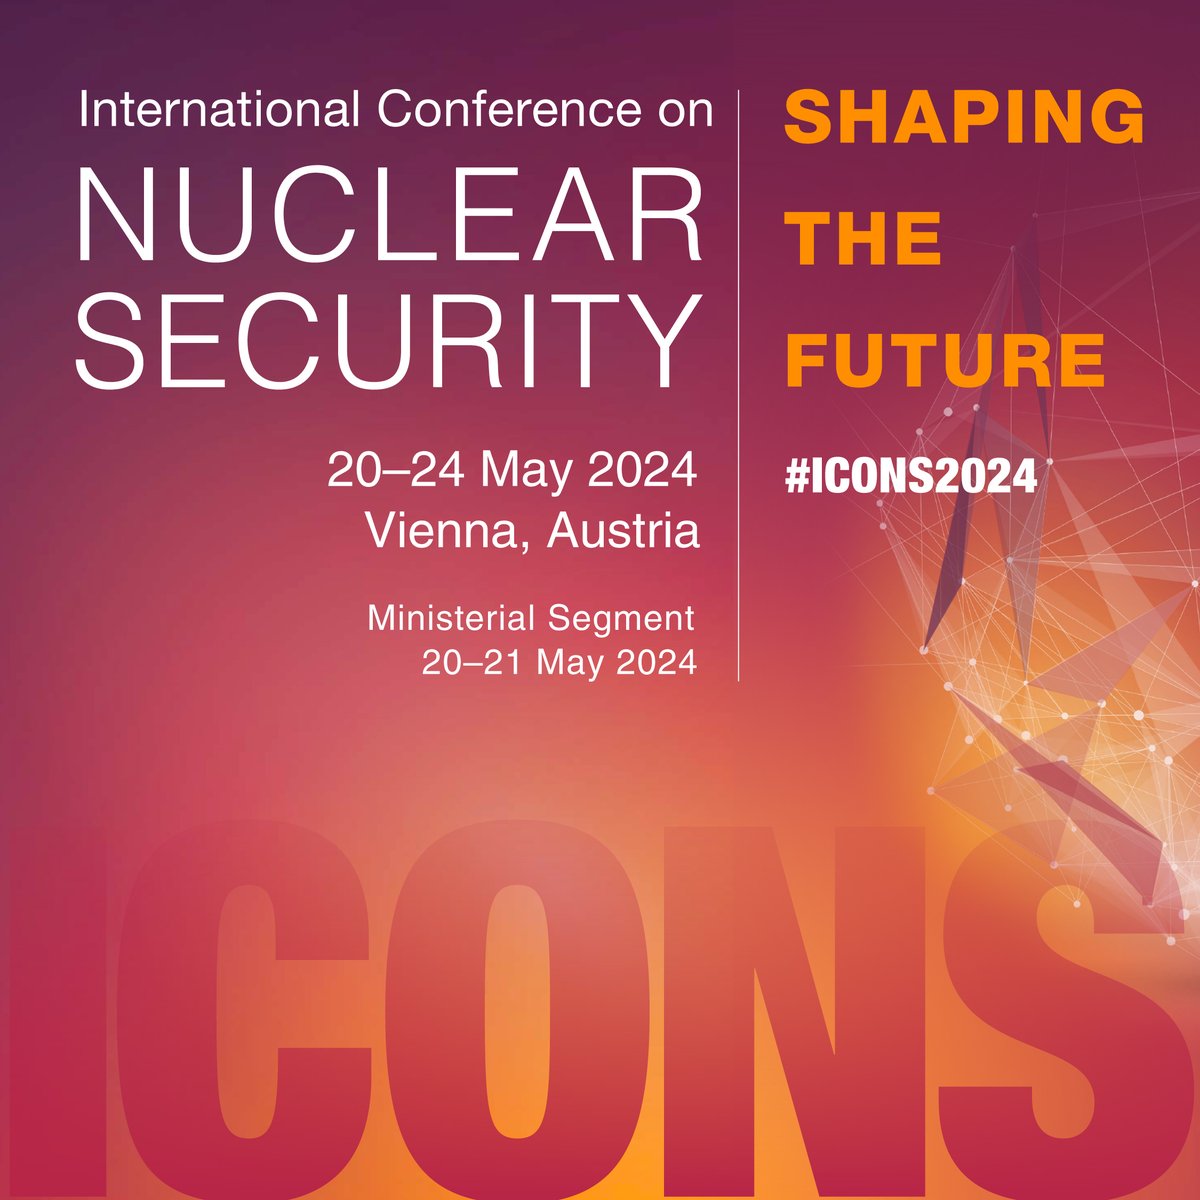 Your expertise could help in #ShapingTheFuture of #NuclearSecurity @iaeaorg !
Register to attend by May 10: 👉atoms.iaea.org/48VDobh
#ICONS2024